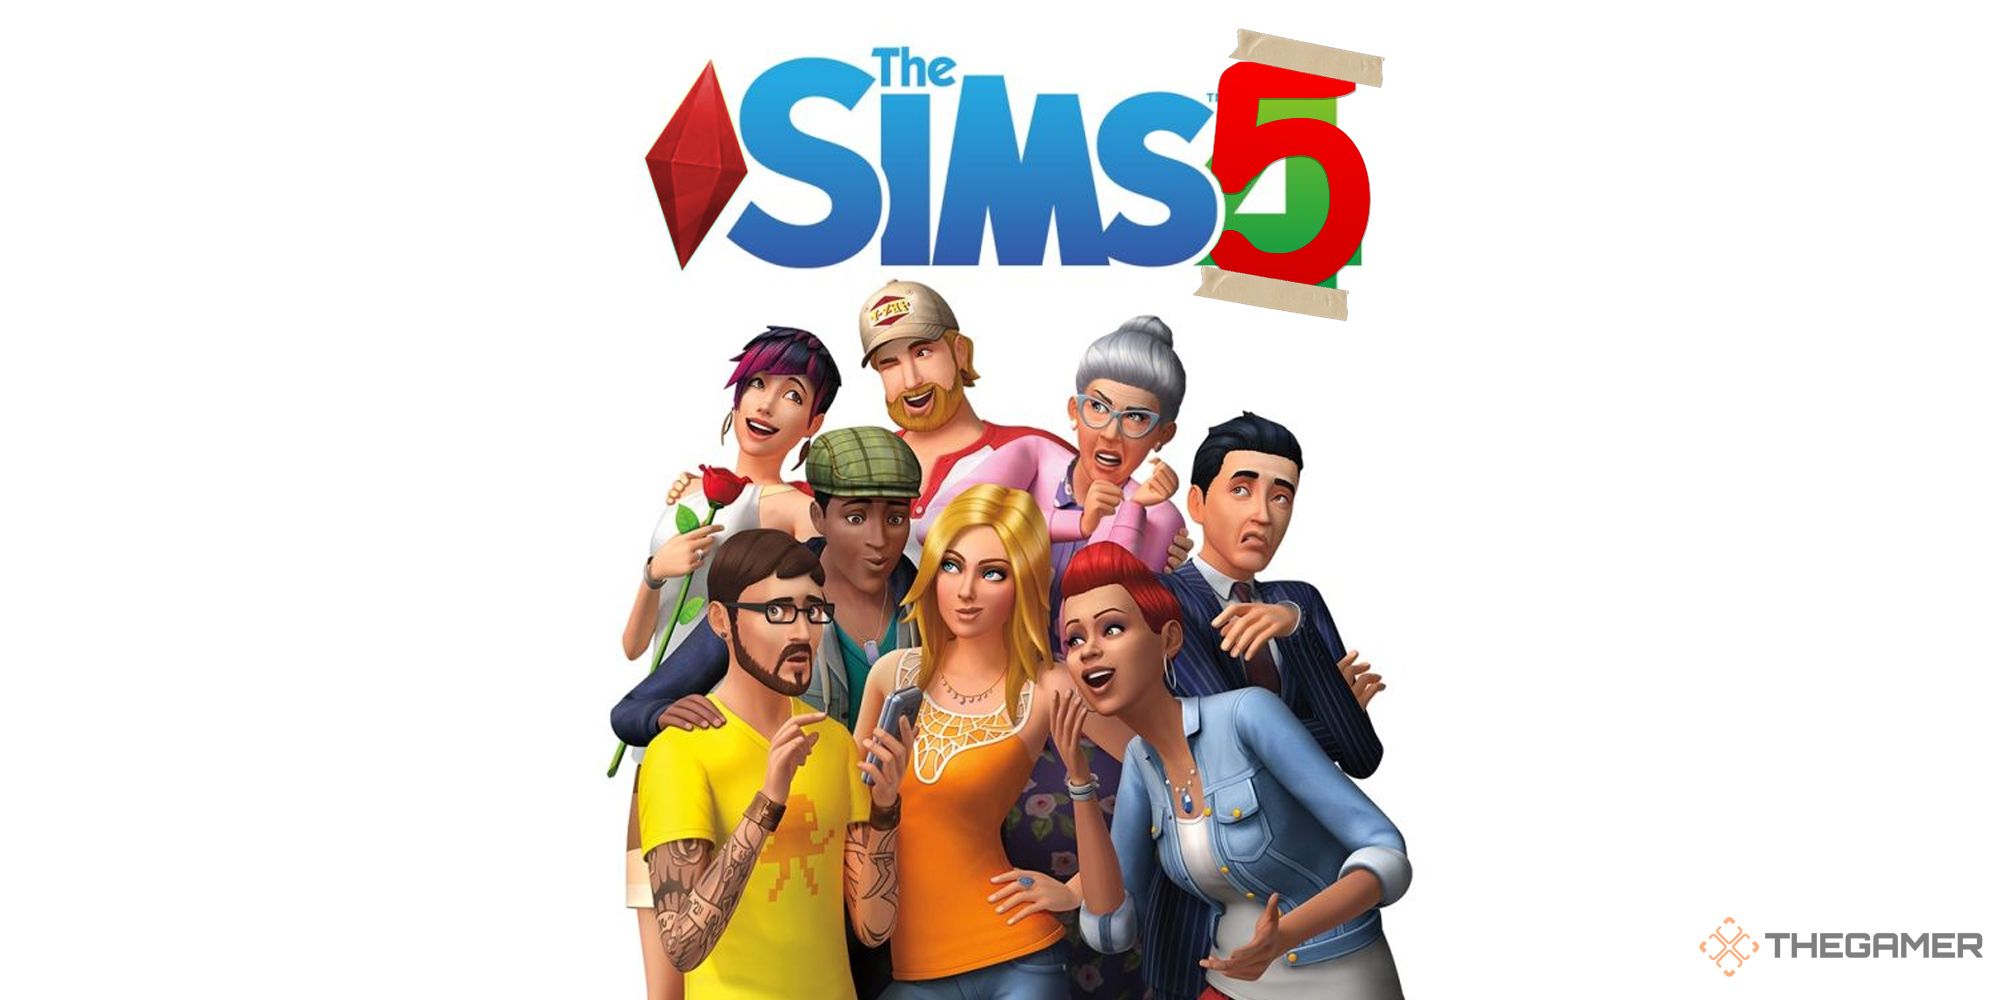 The Sims 5 mock up fake logo with 5 taped over 4